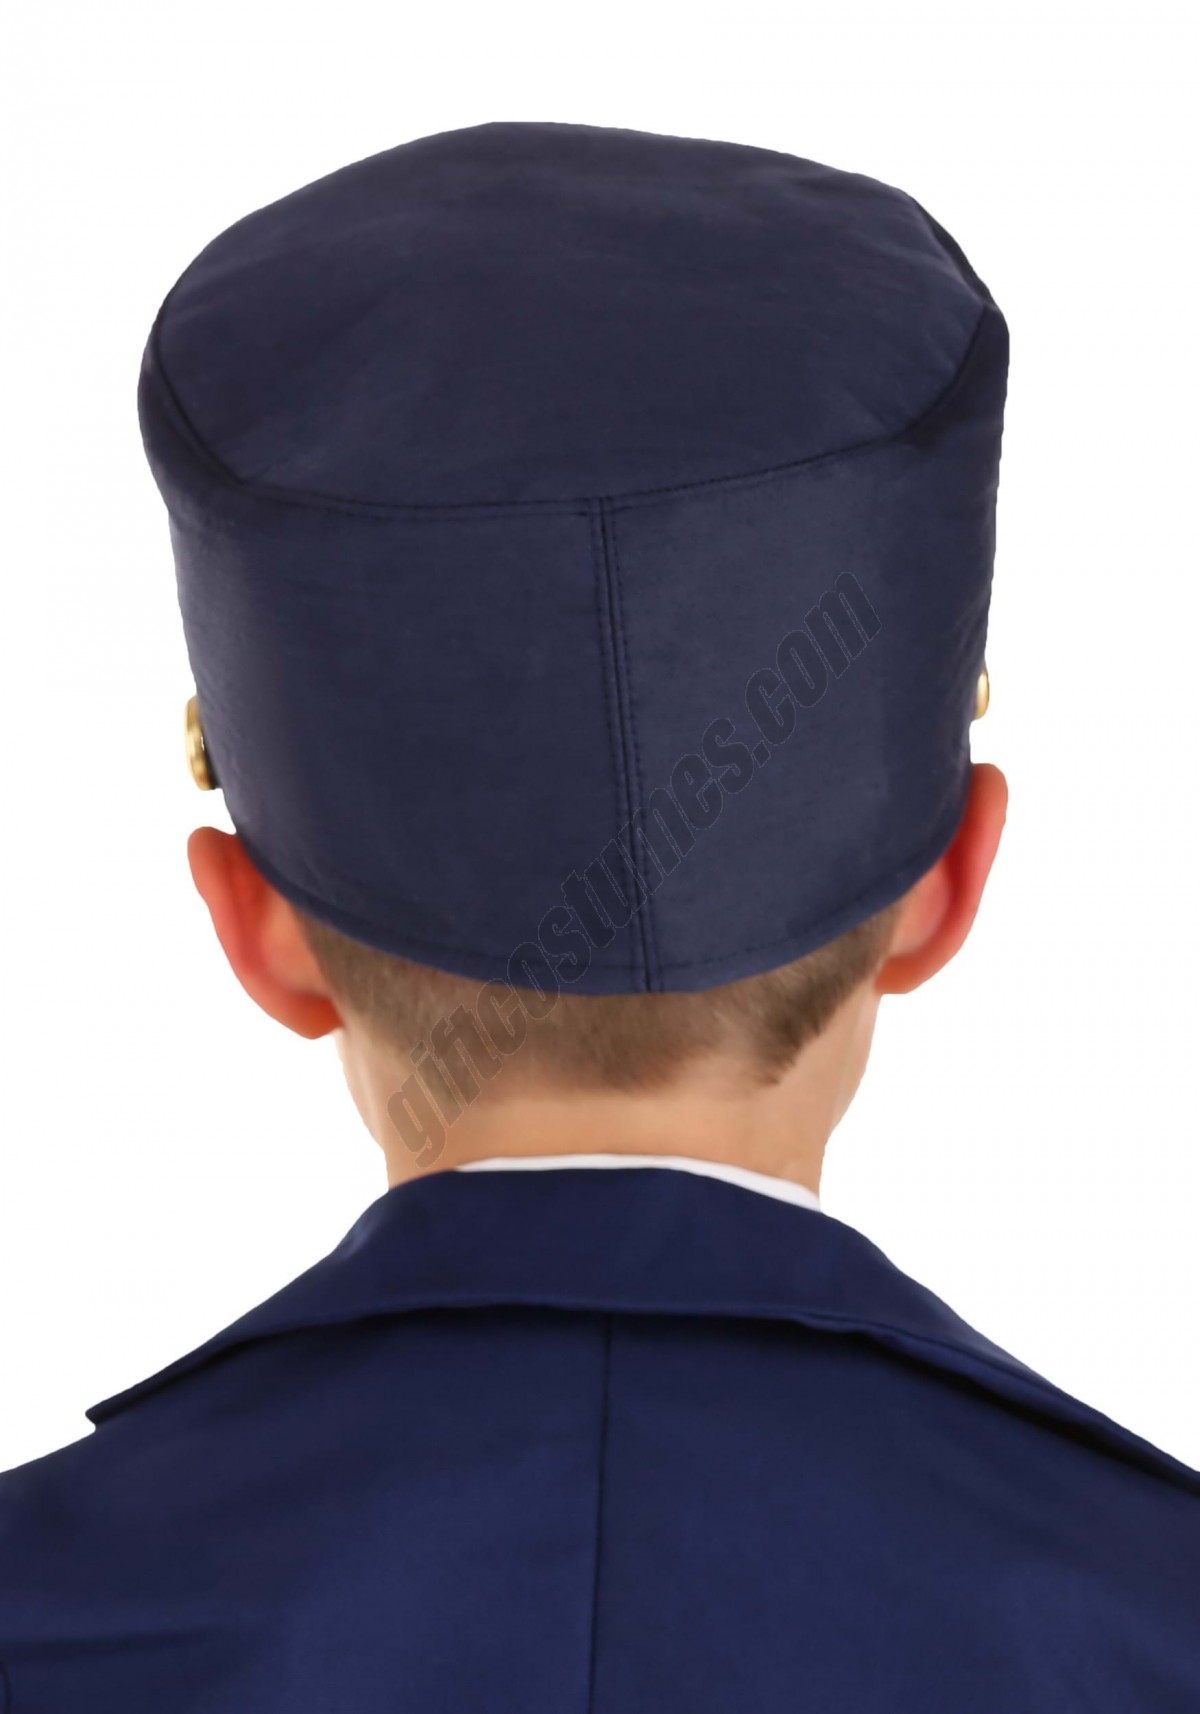 Train Conductor Hat for Kids Promotions - -6